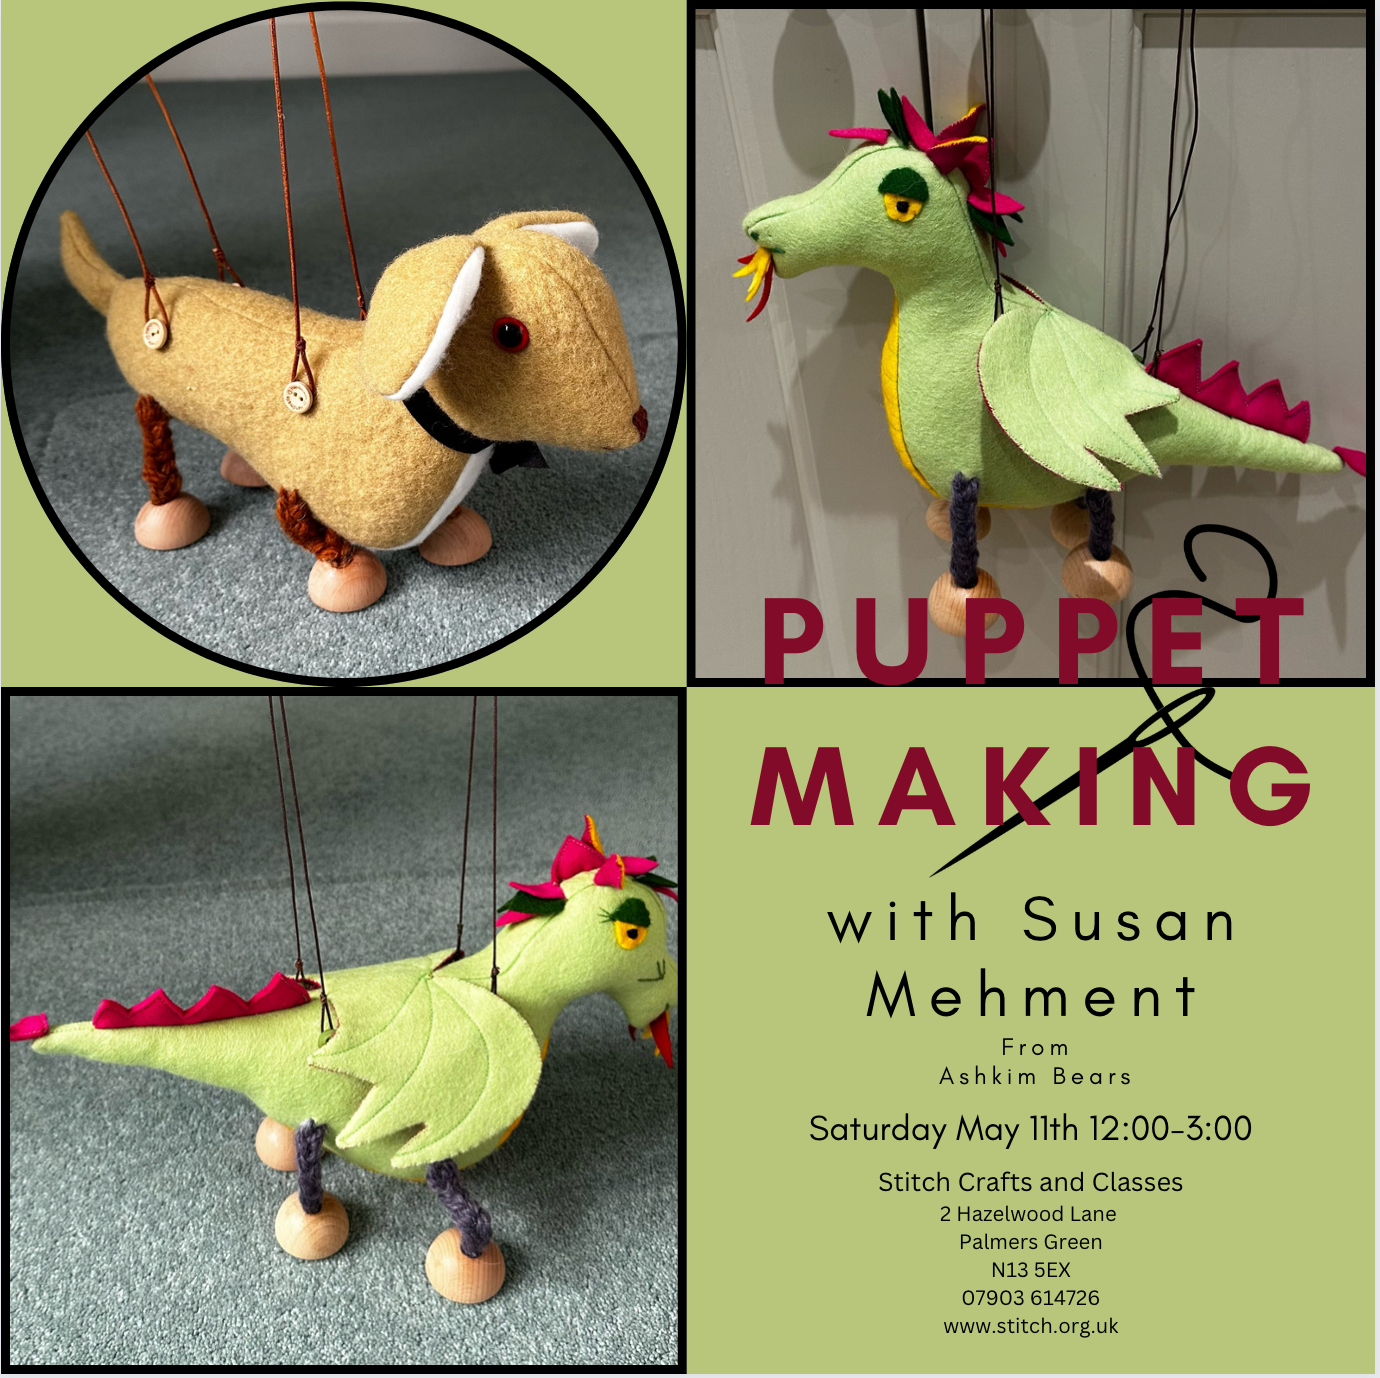 Puppet Making Workshop with Susan Mehmet
Saturday 11th May, 12:00-3:00